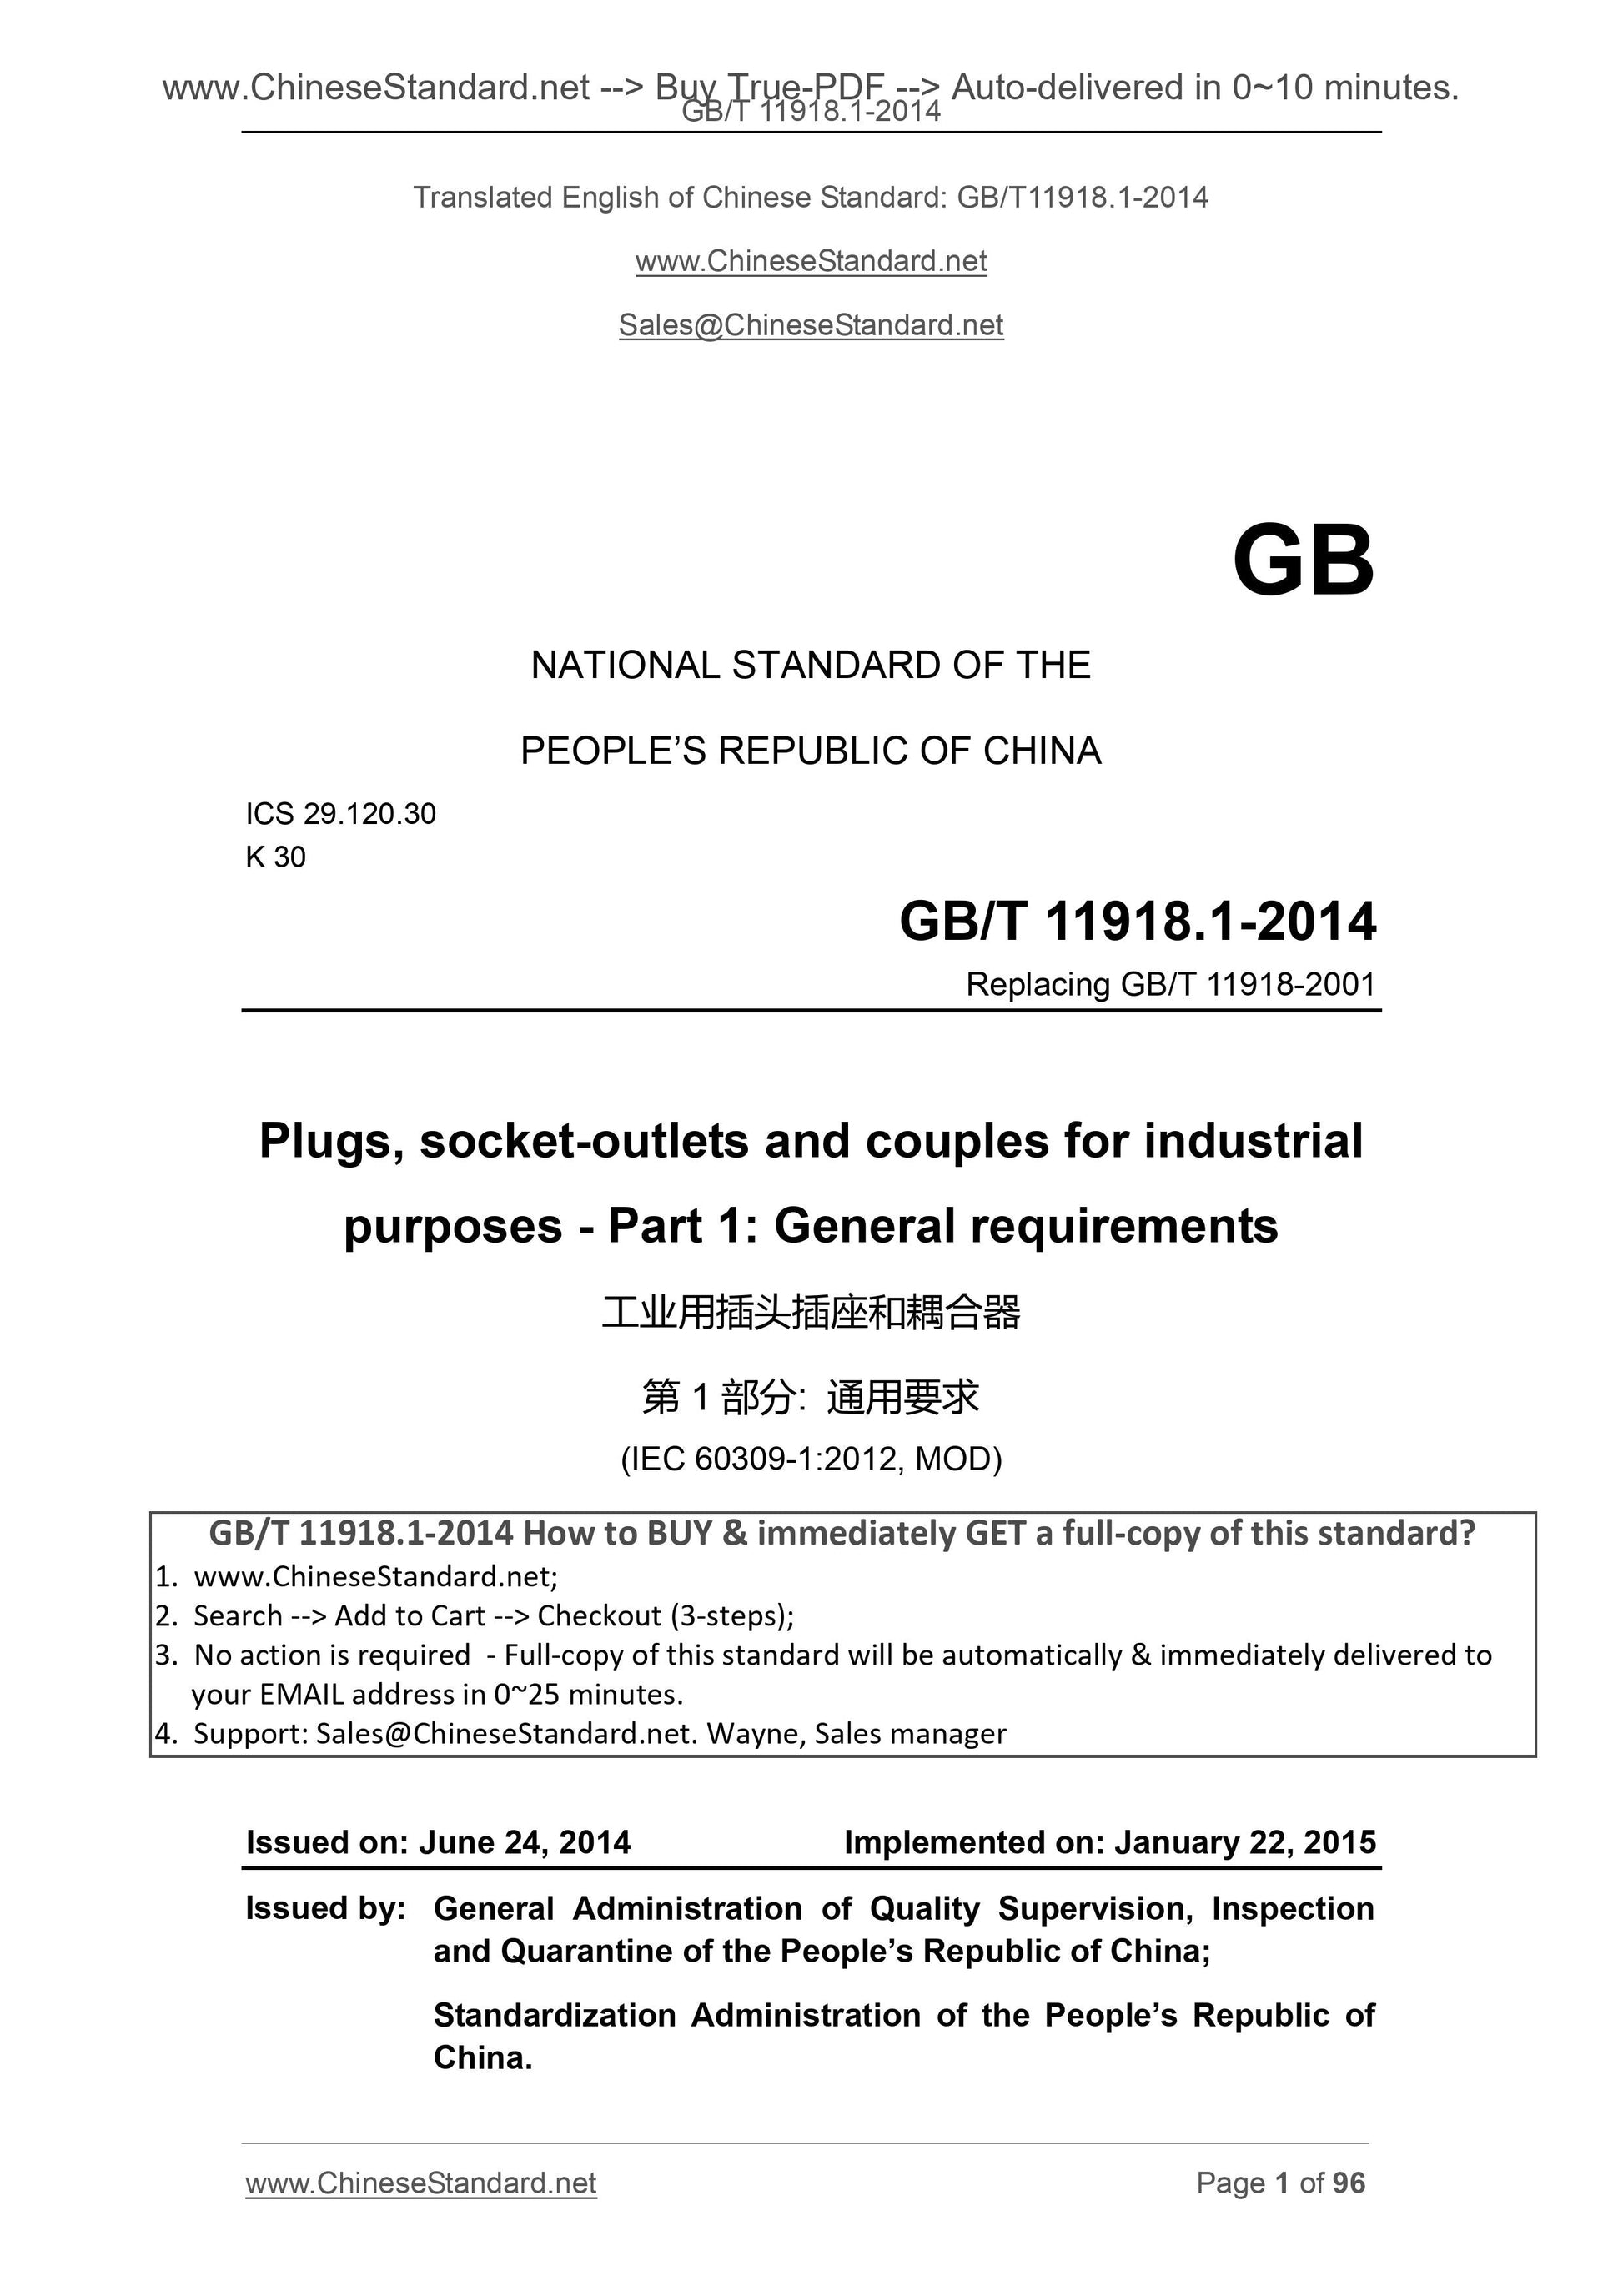 GB/T 11918.1-2014 Page 1